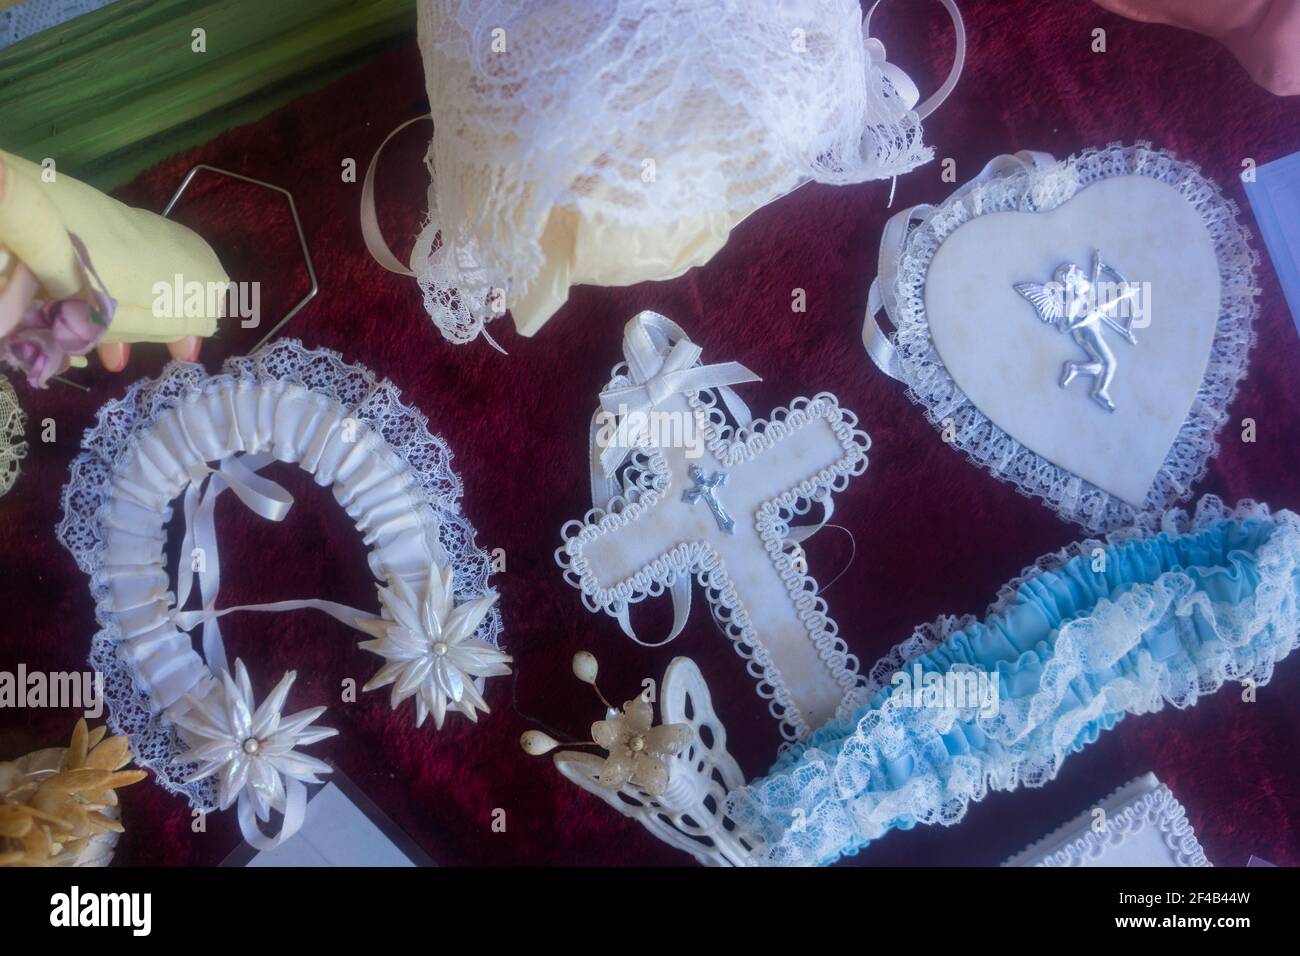 Vintage wedding items carried by brides in times gone by on display against a red velvet background at the Greenmount Heritage Fair. Stock Photo